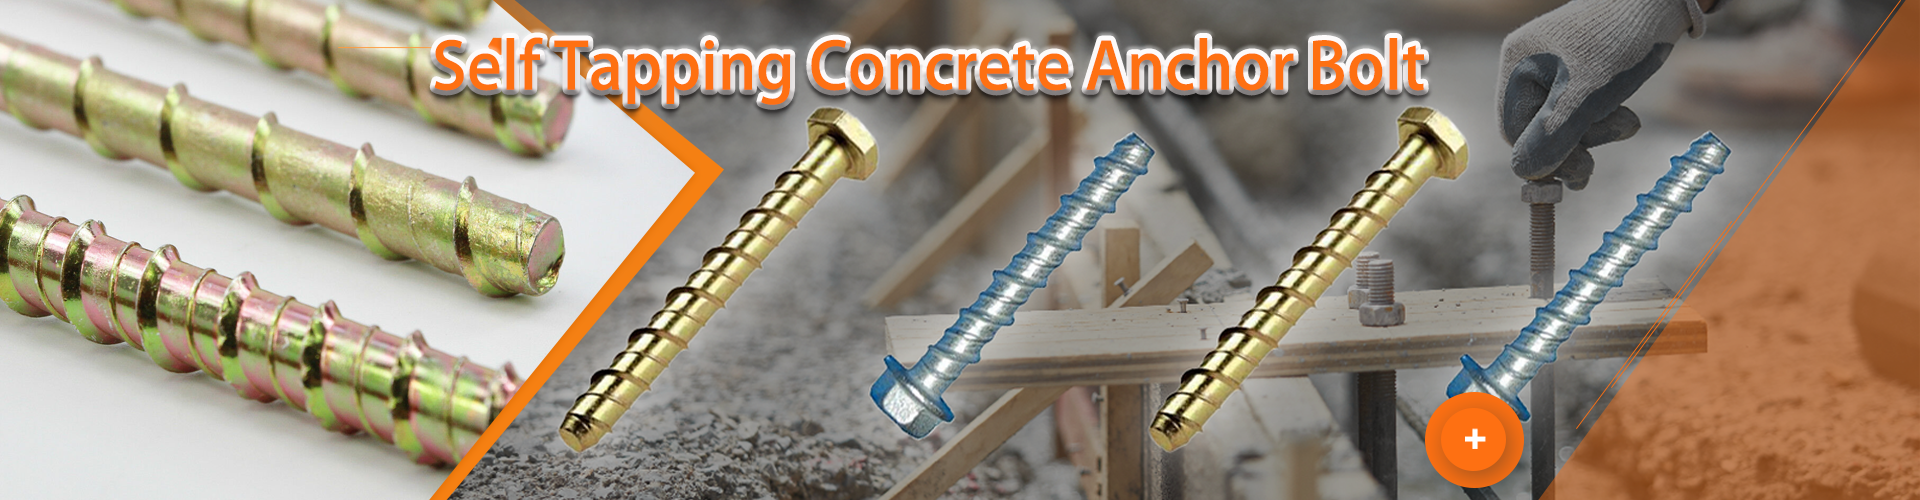 Self Tapping Concrete Anchor Bolt